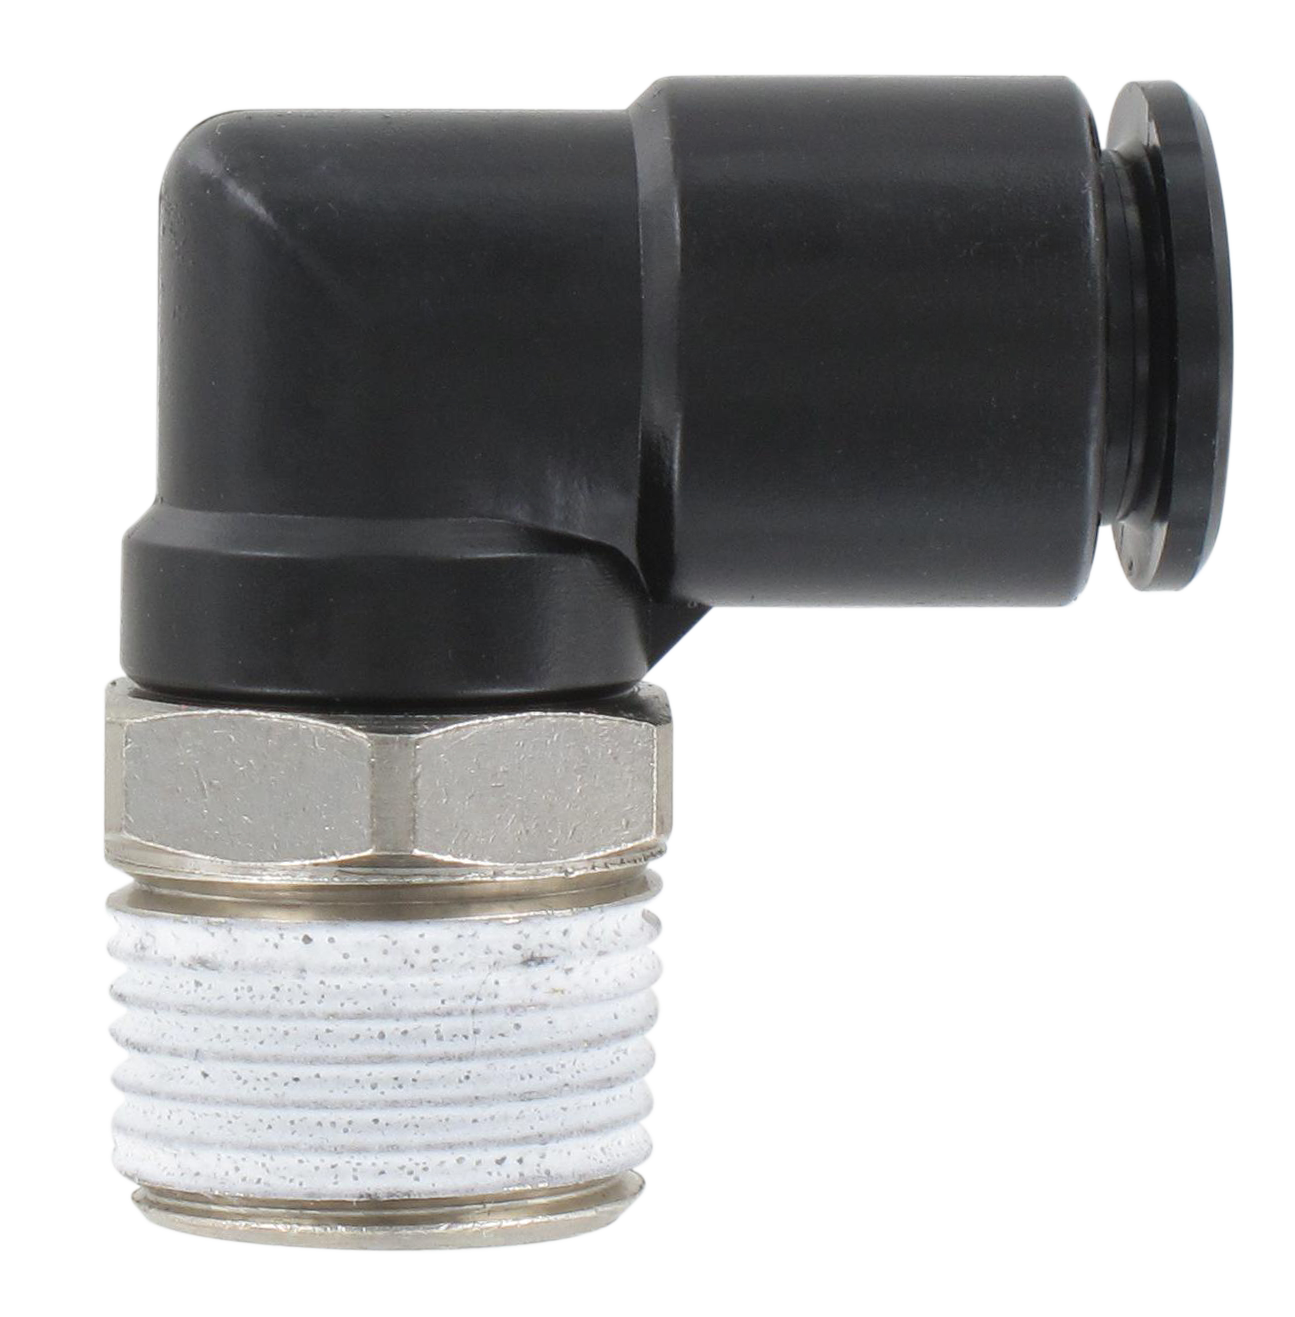 Elbow male swivel push-in fitting BSP tapered in technopolymer T10-3/8 Pneumatic push-in fittings